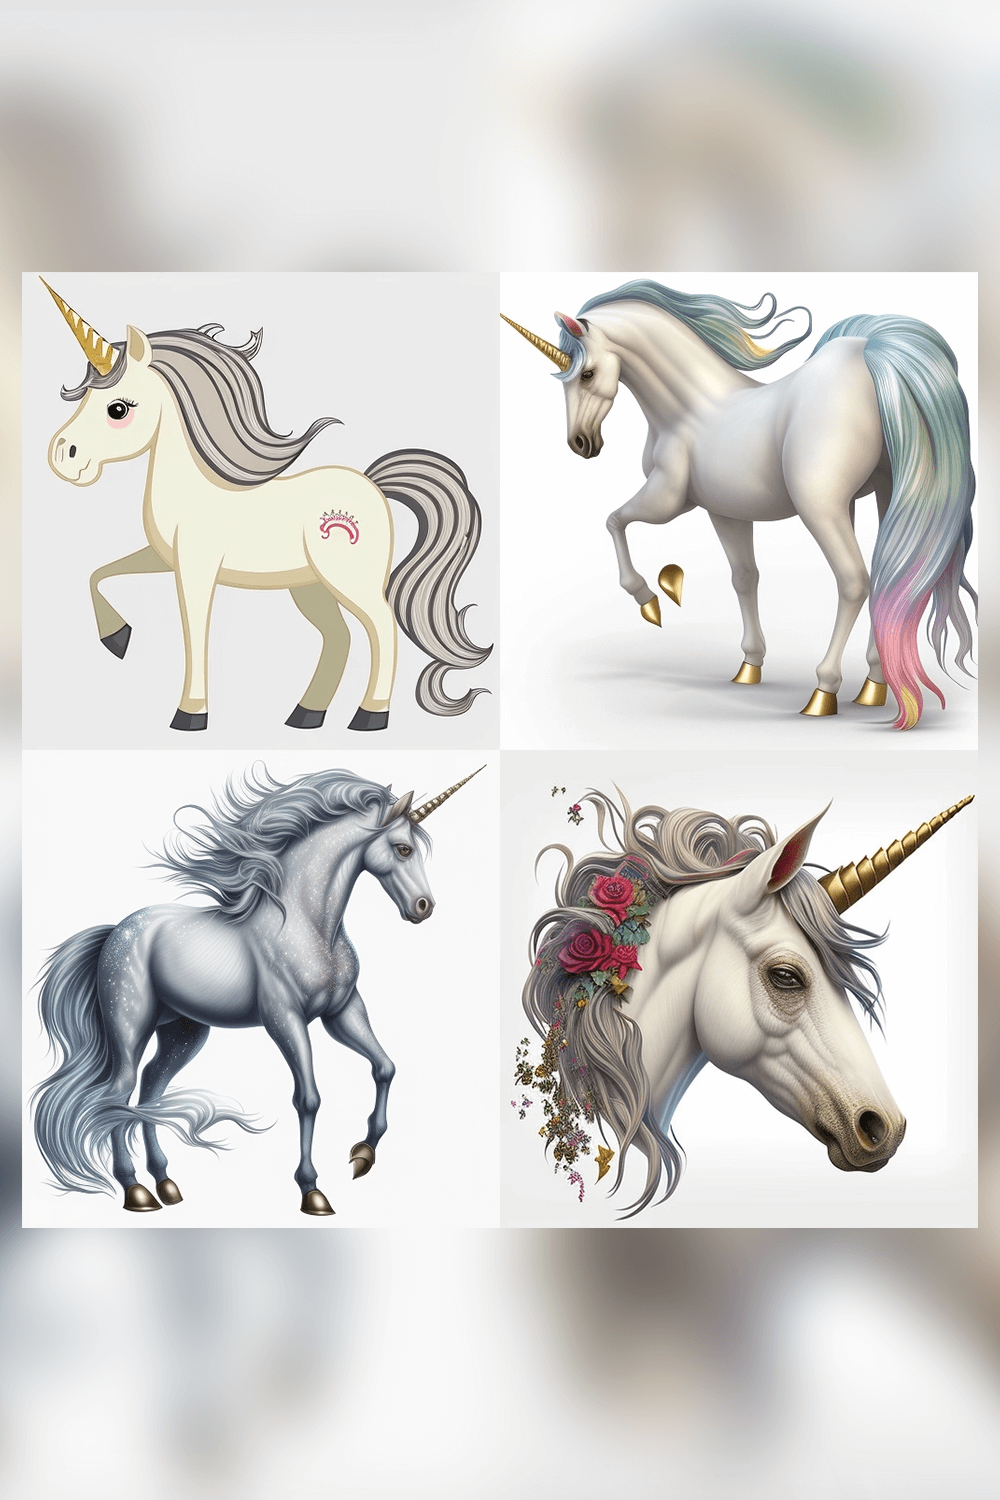 Series of four unicorns with different colored manes.